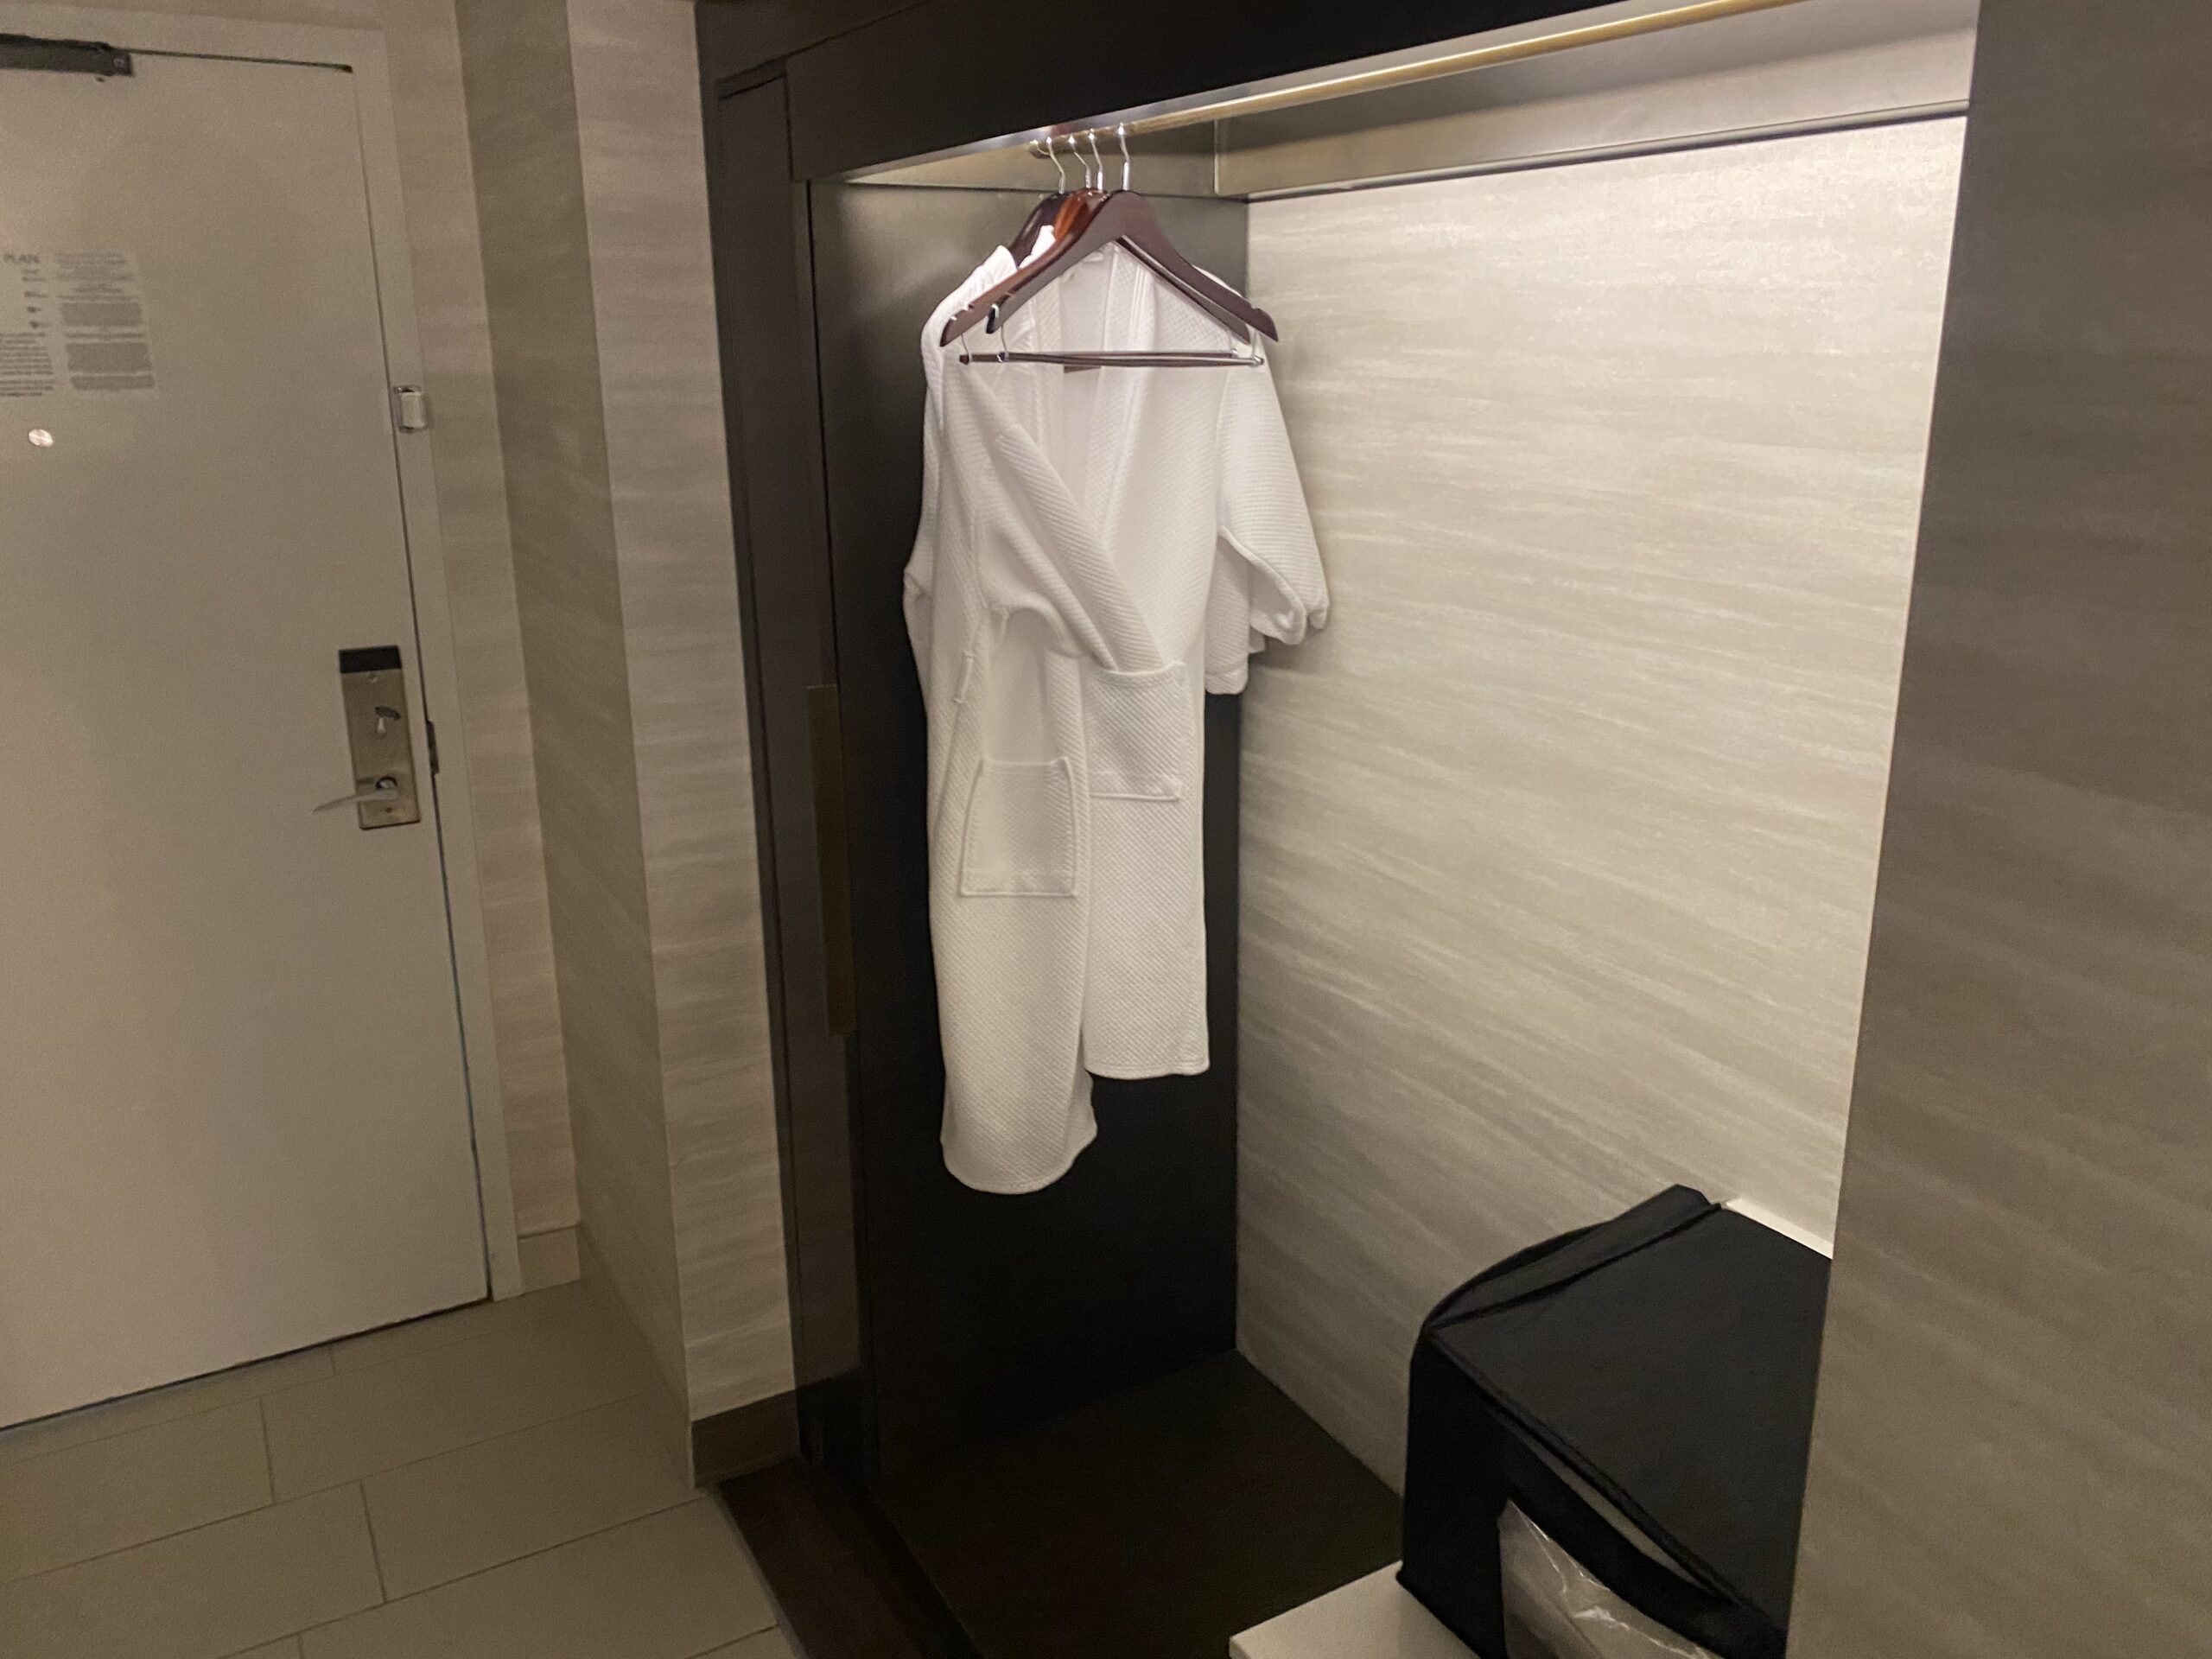 a white robe from a swinger in a closet